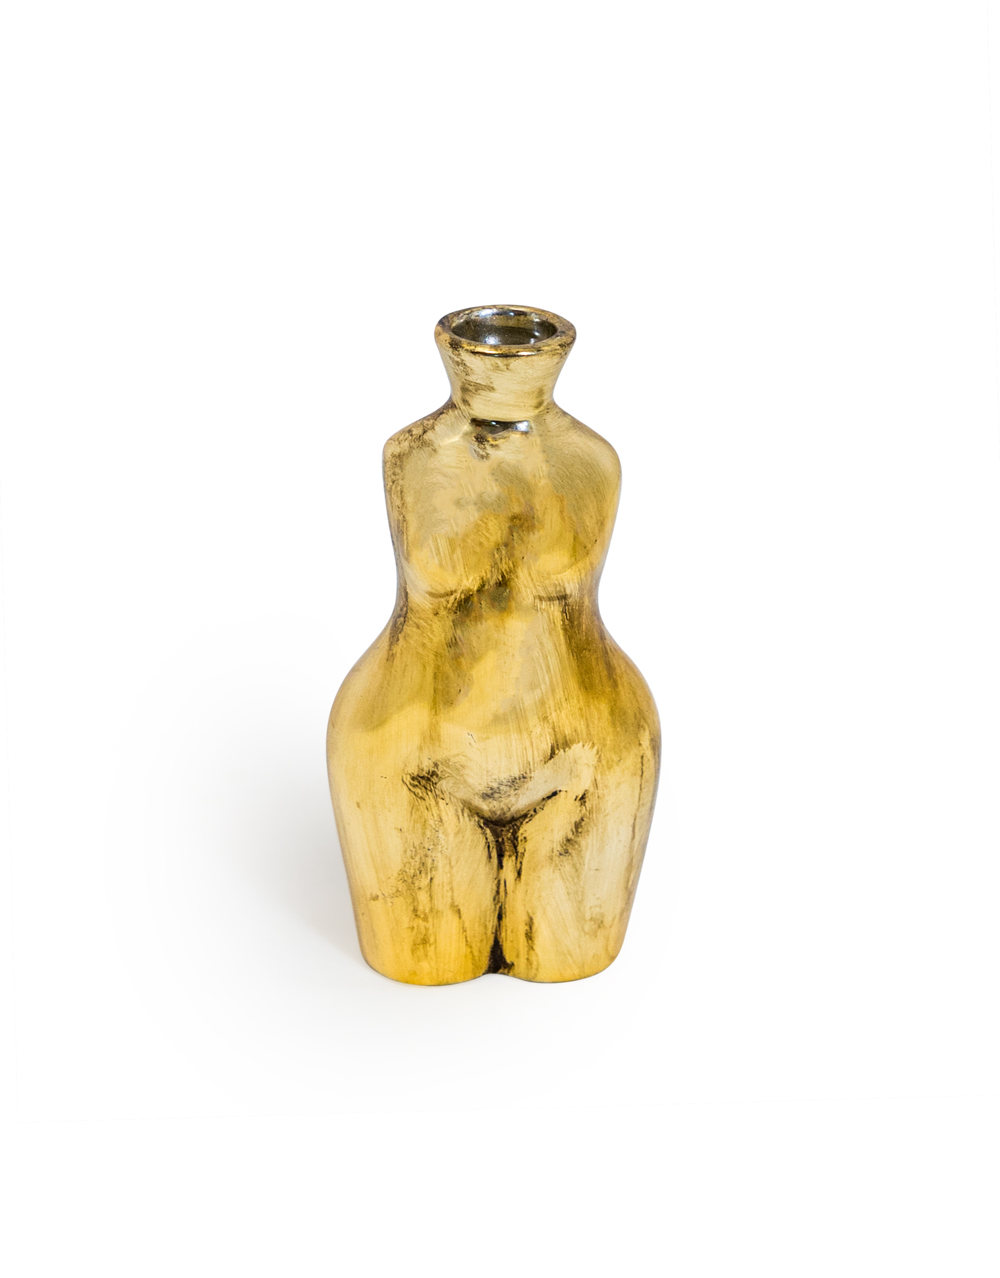 &Quirky Antique Gold Female Body Shaped Vase - Small